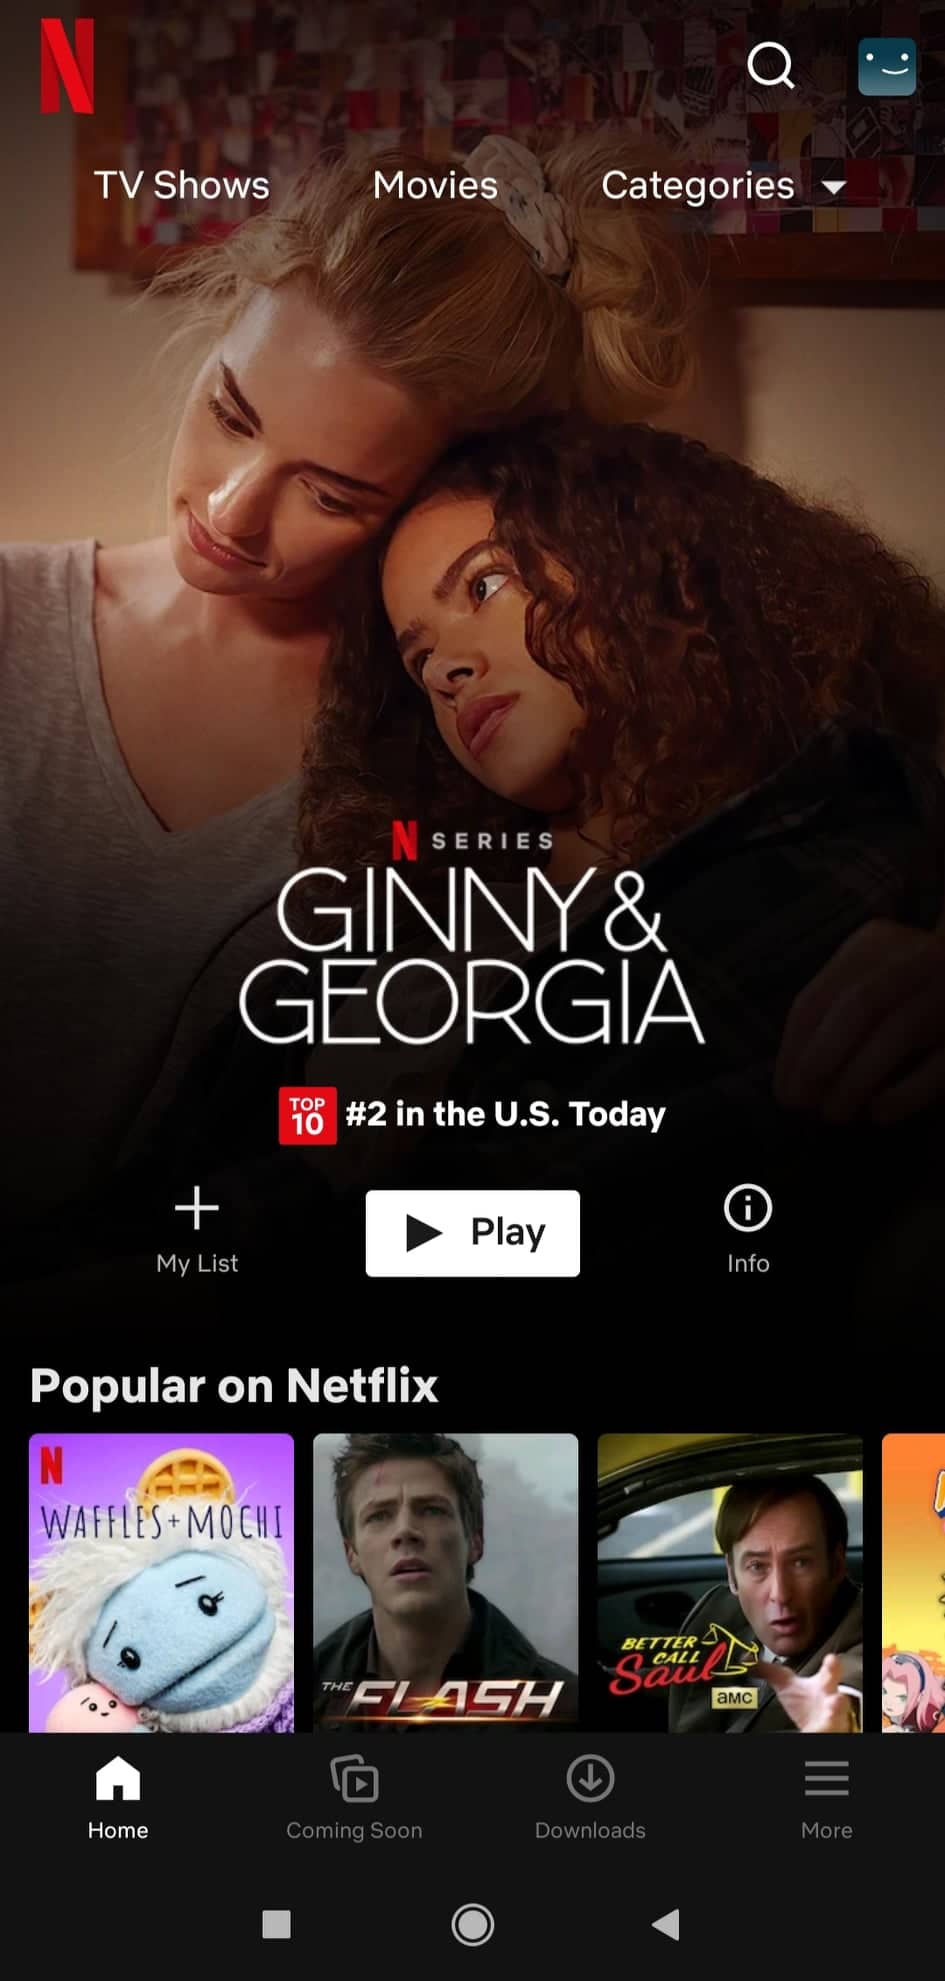 Netflix-App-Interface-in-India